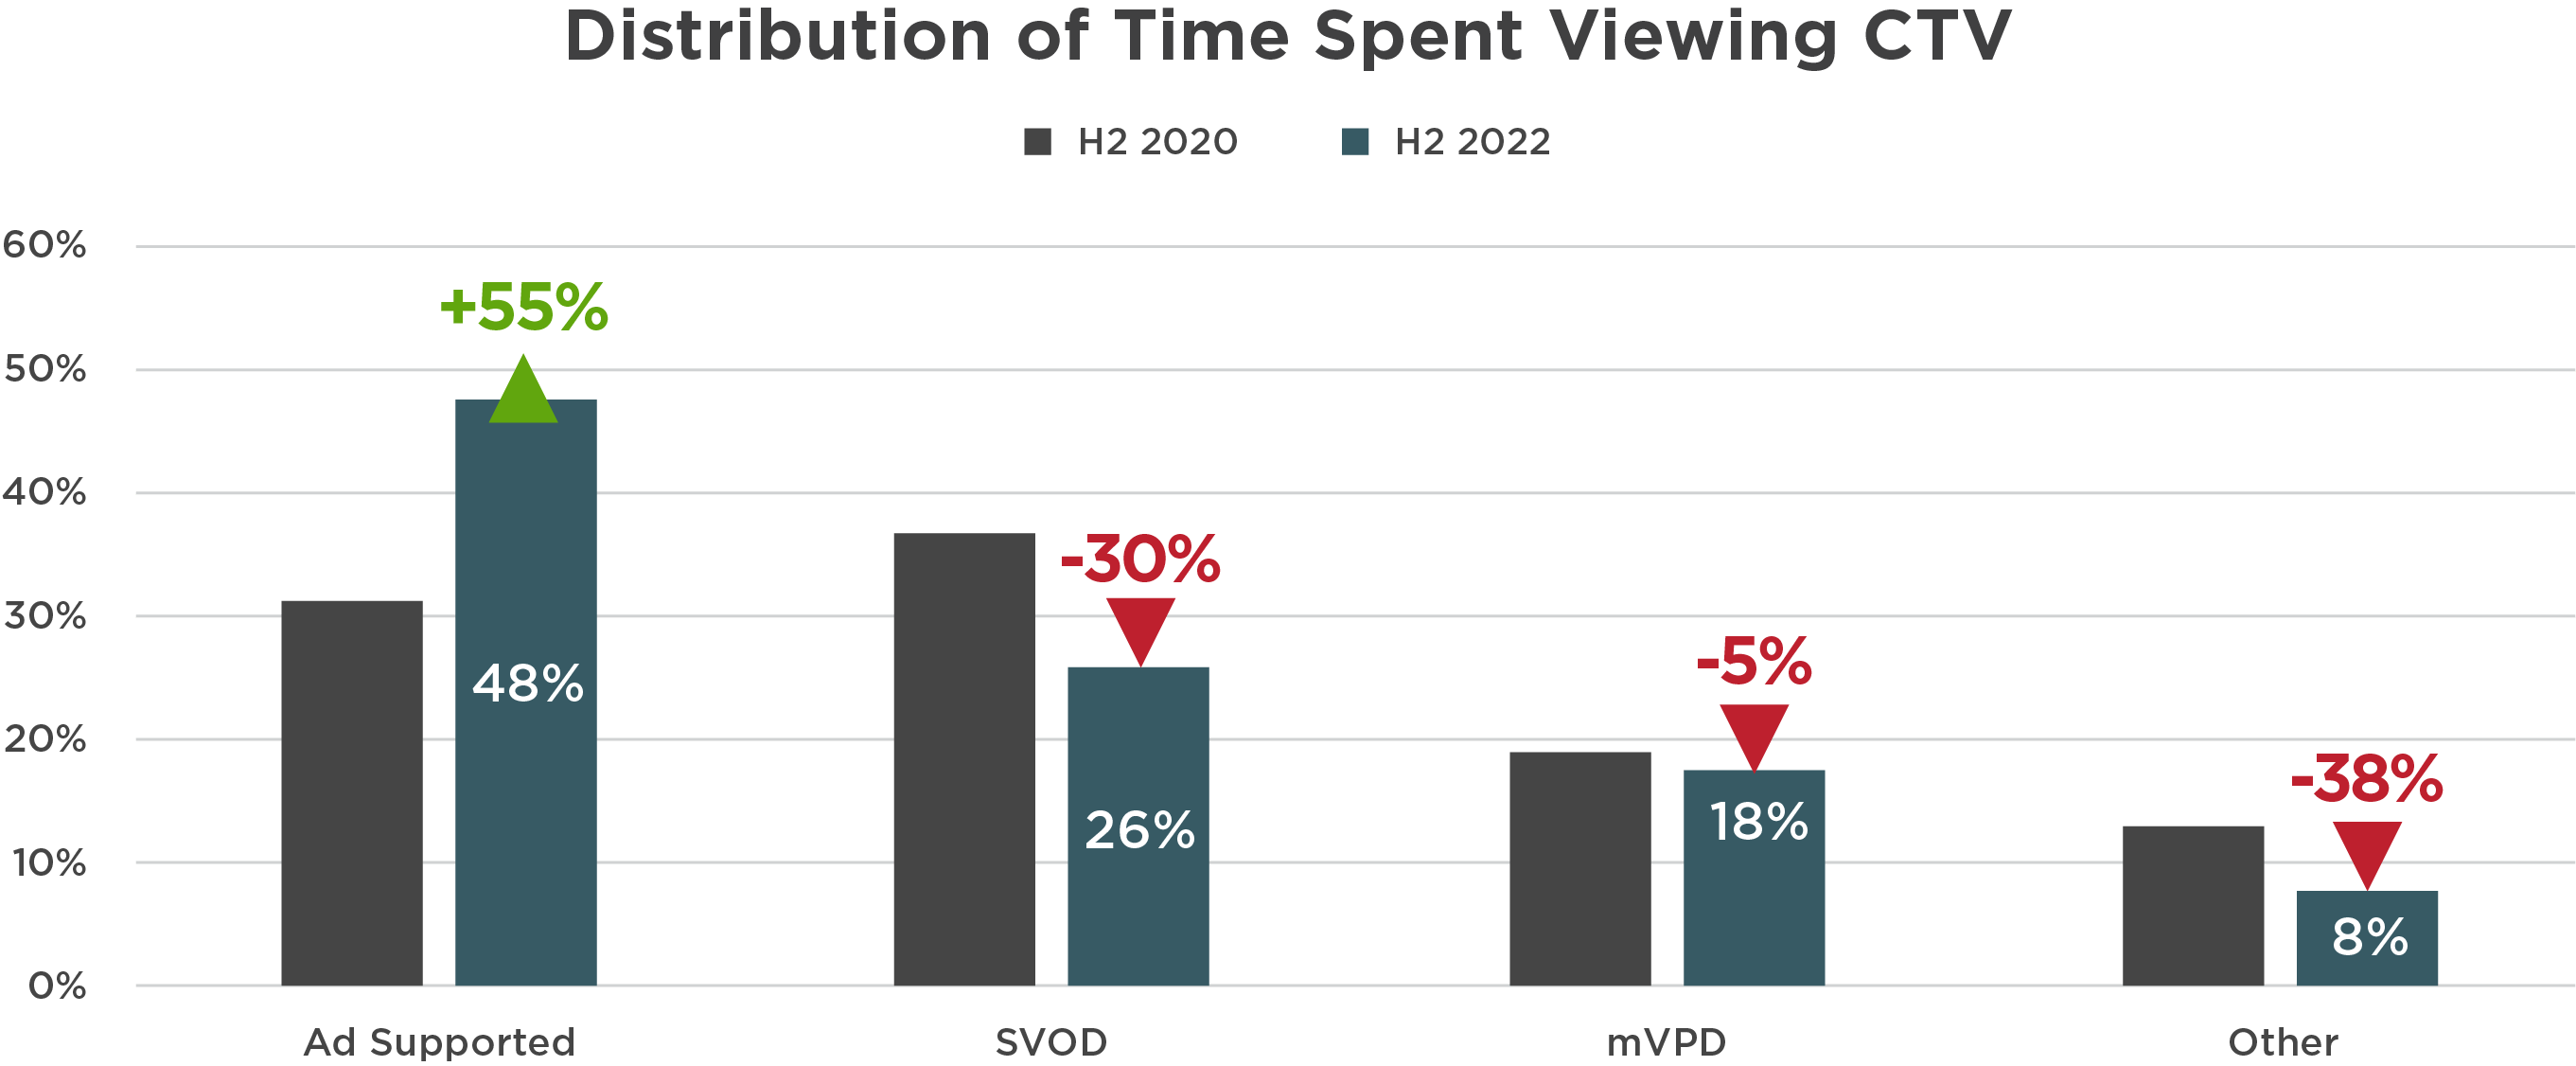 Distribution of Time Spent Viewing CTV